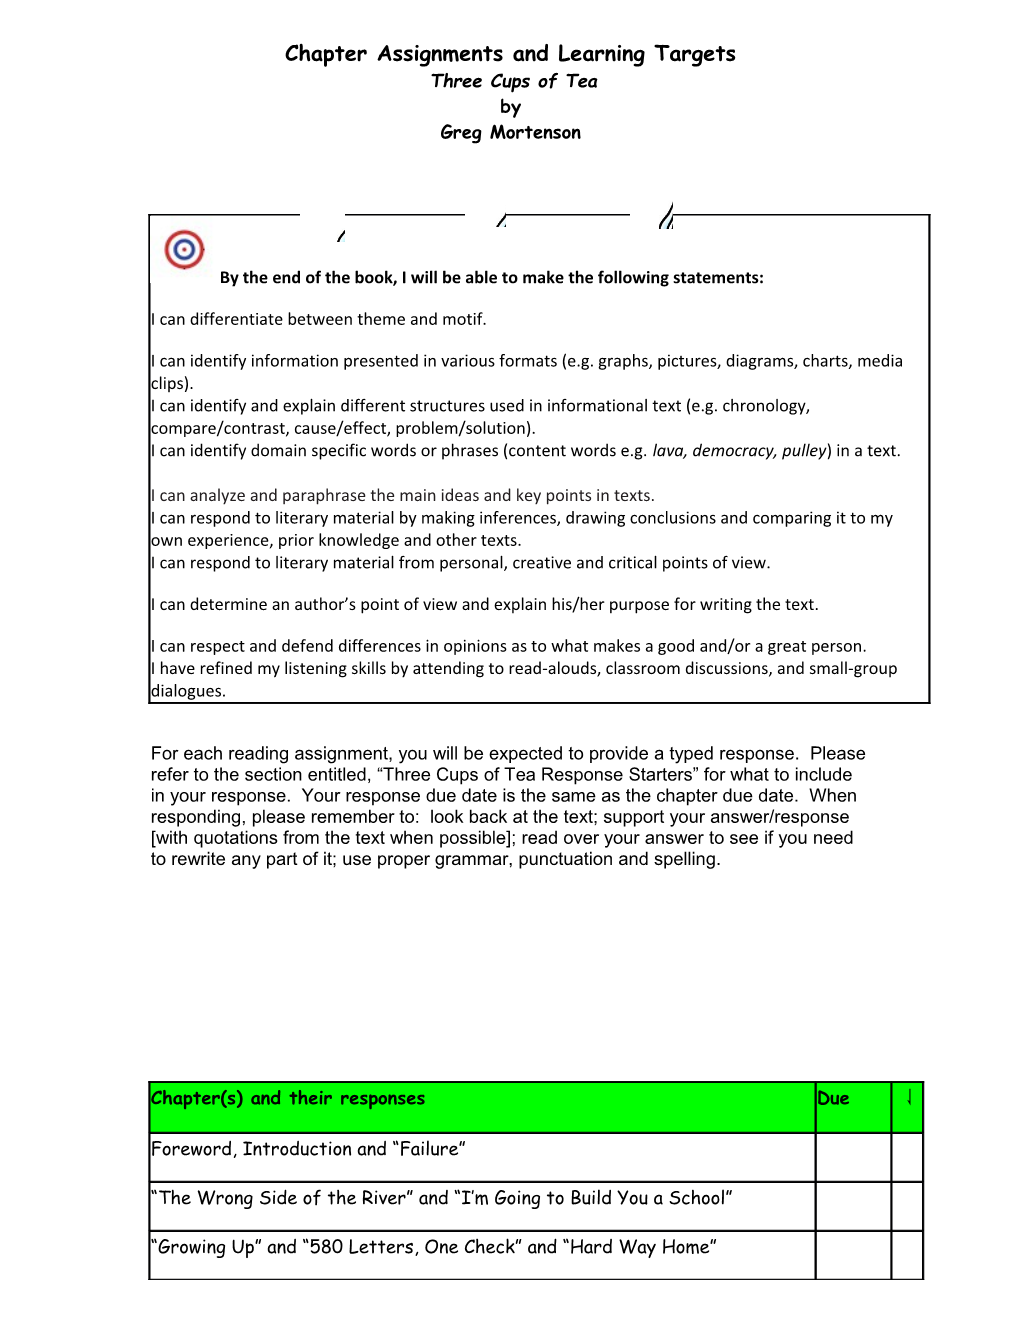 Chapter Assignments and Learning Targets